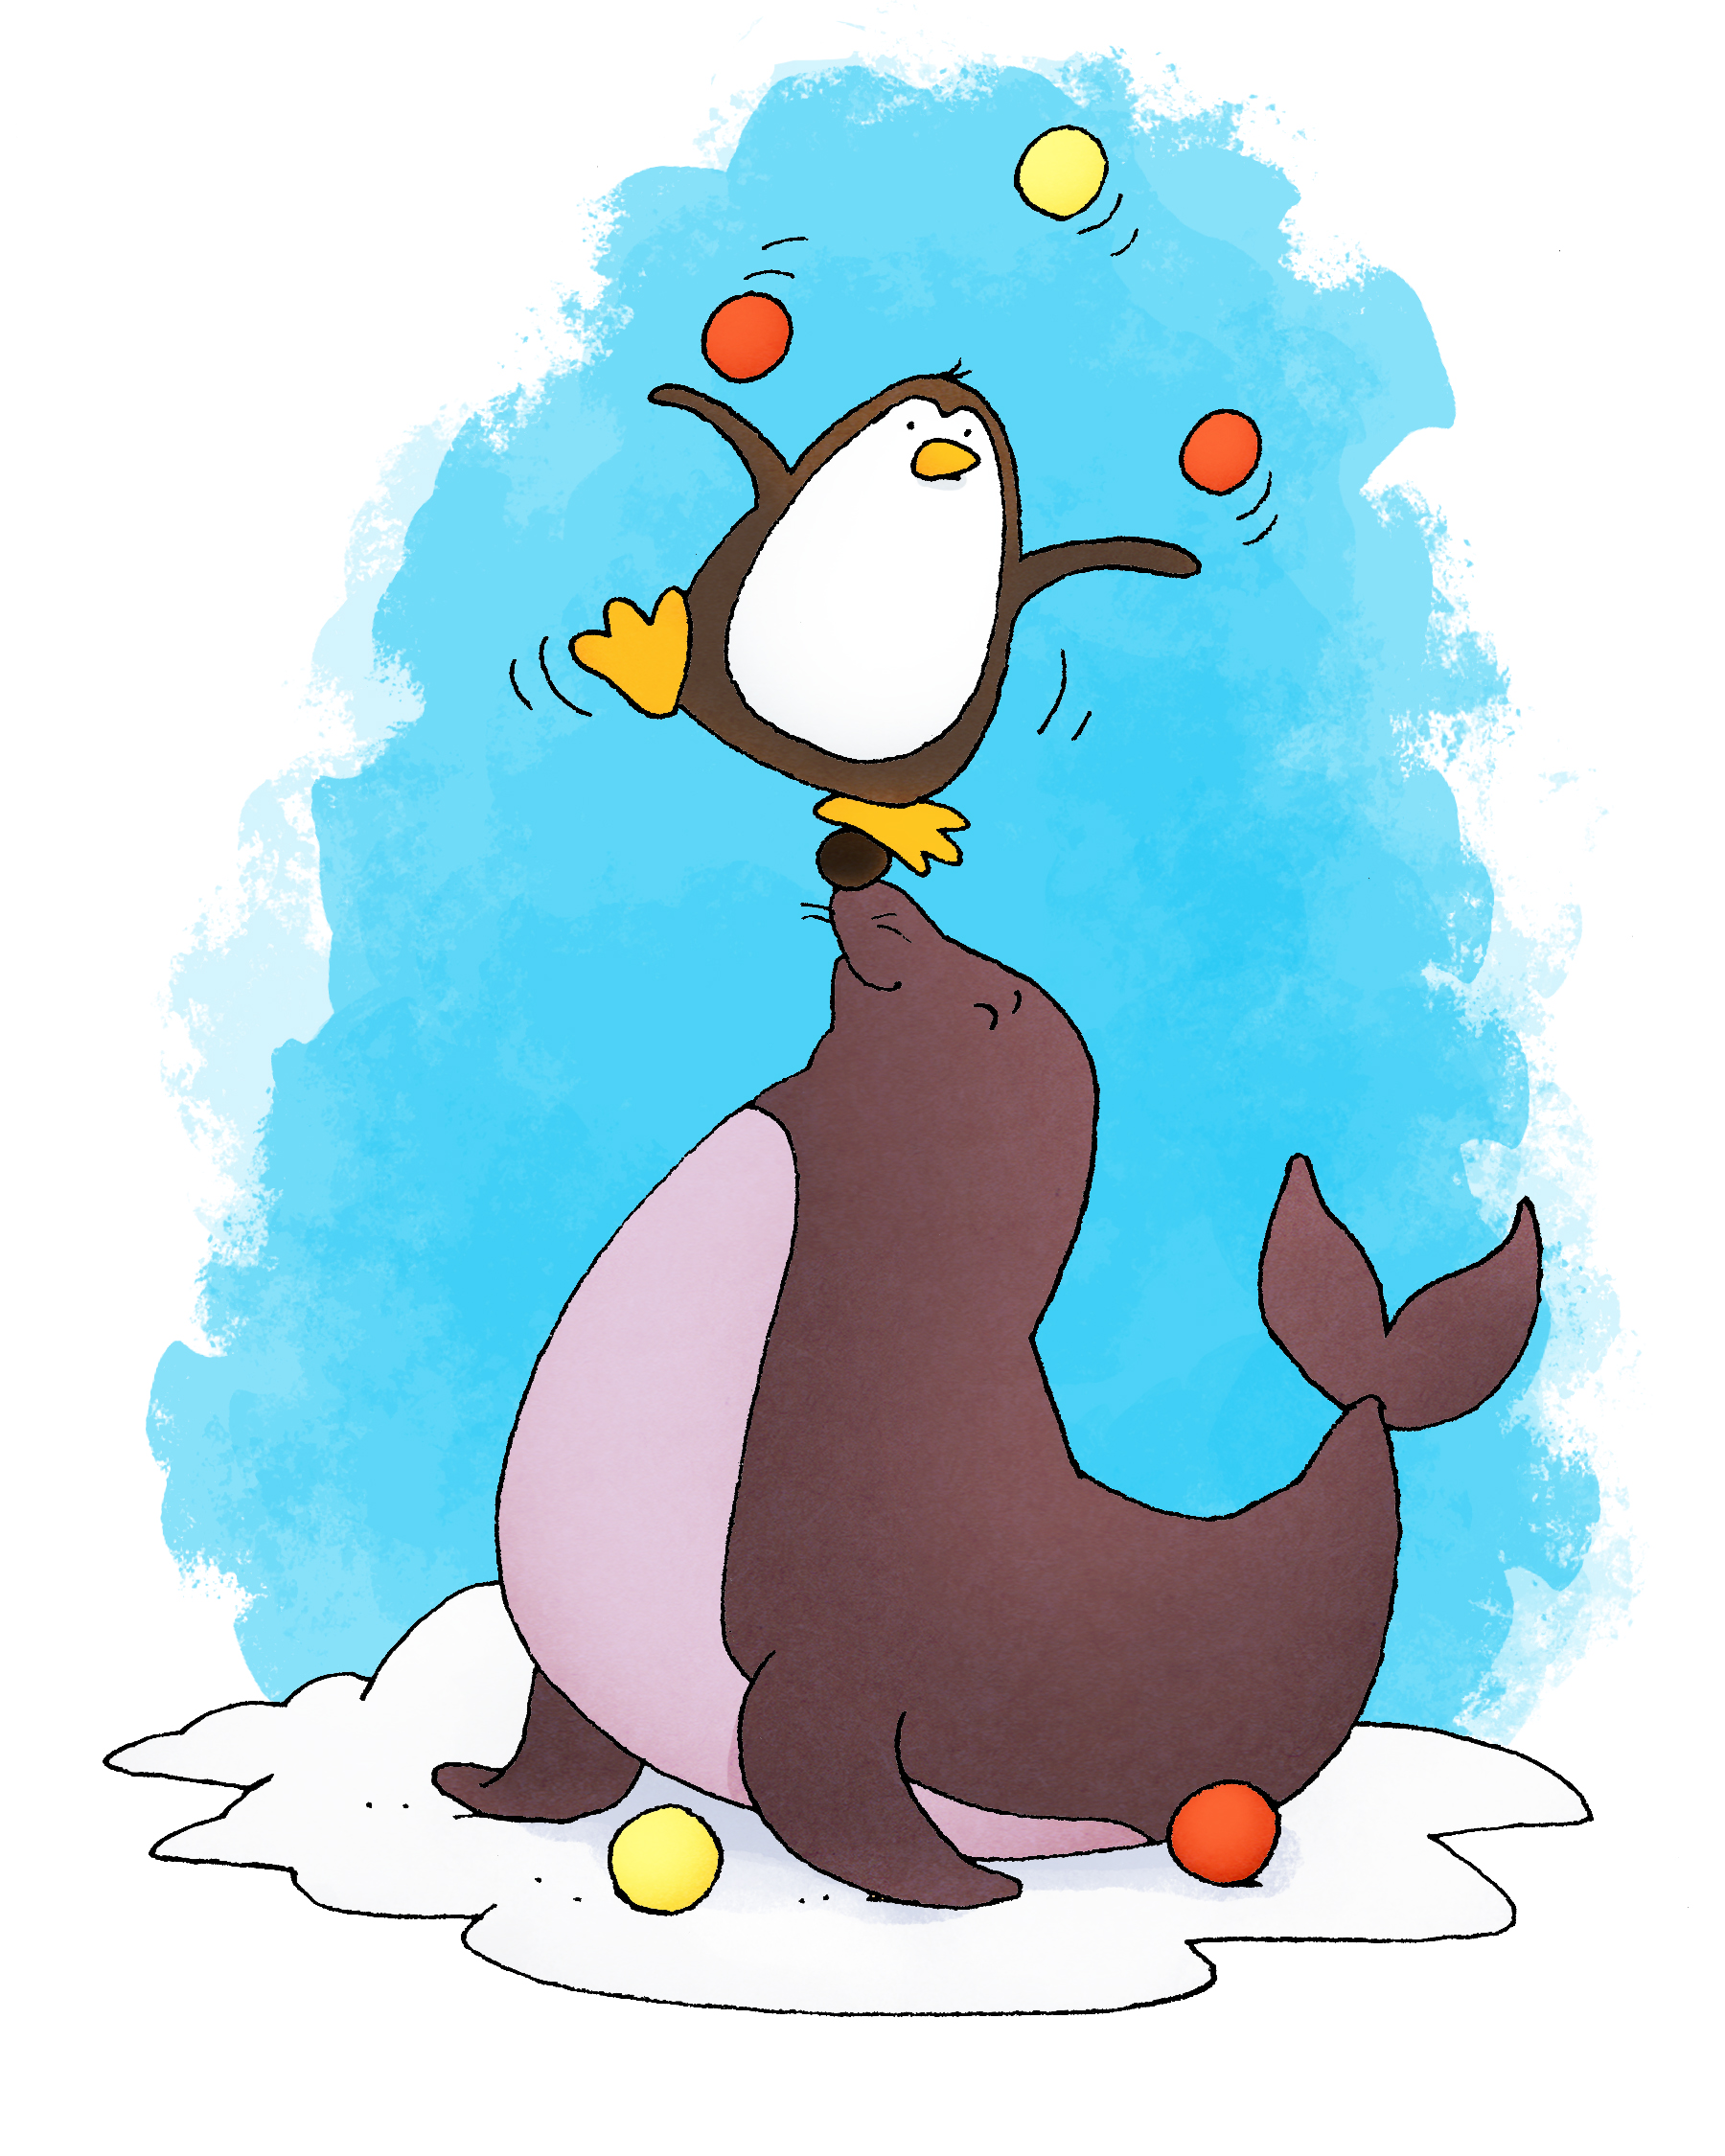 Penguin juggling on top of a seal's nose, light-hearted illustration